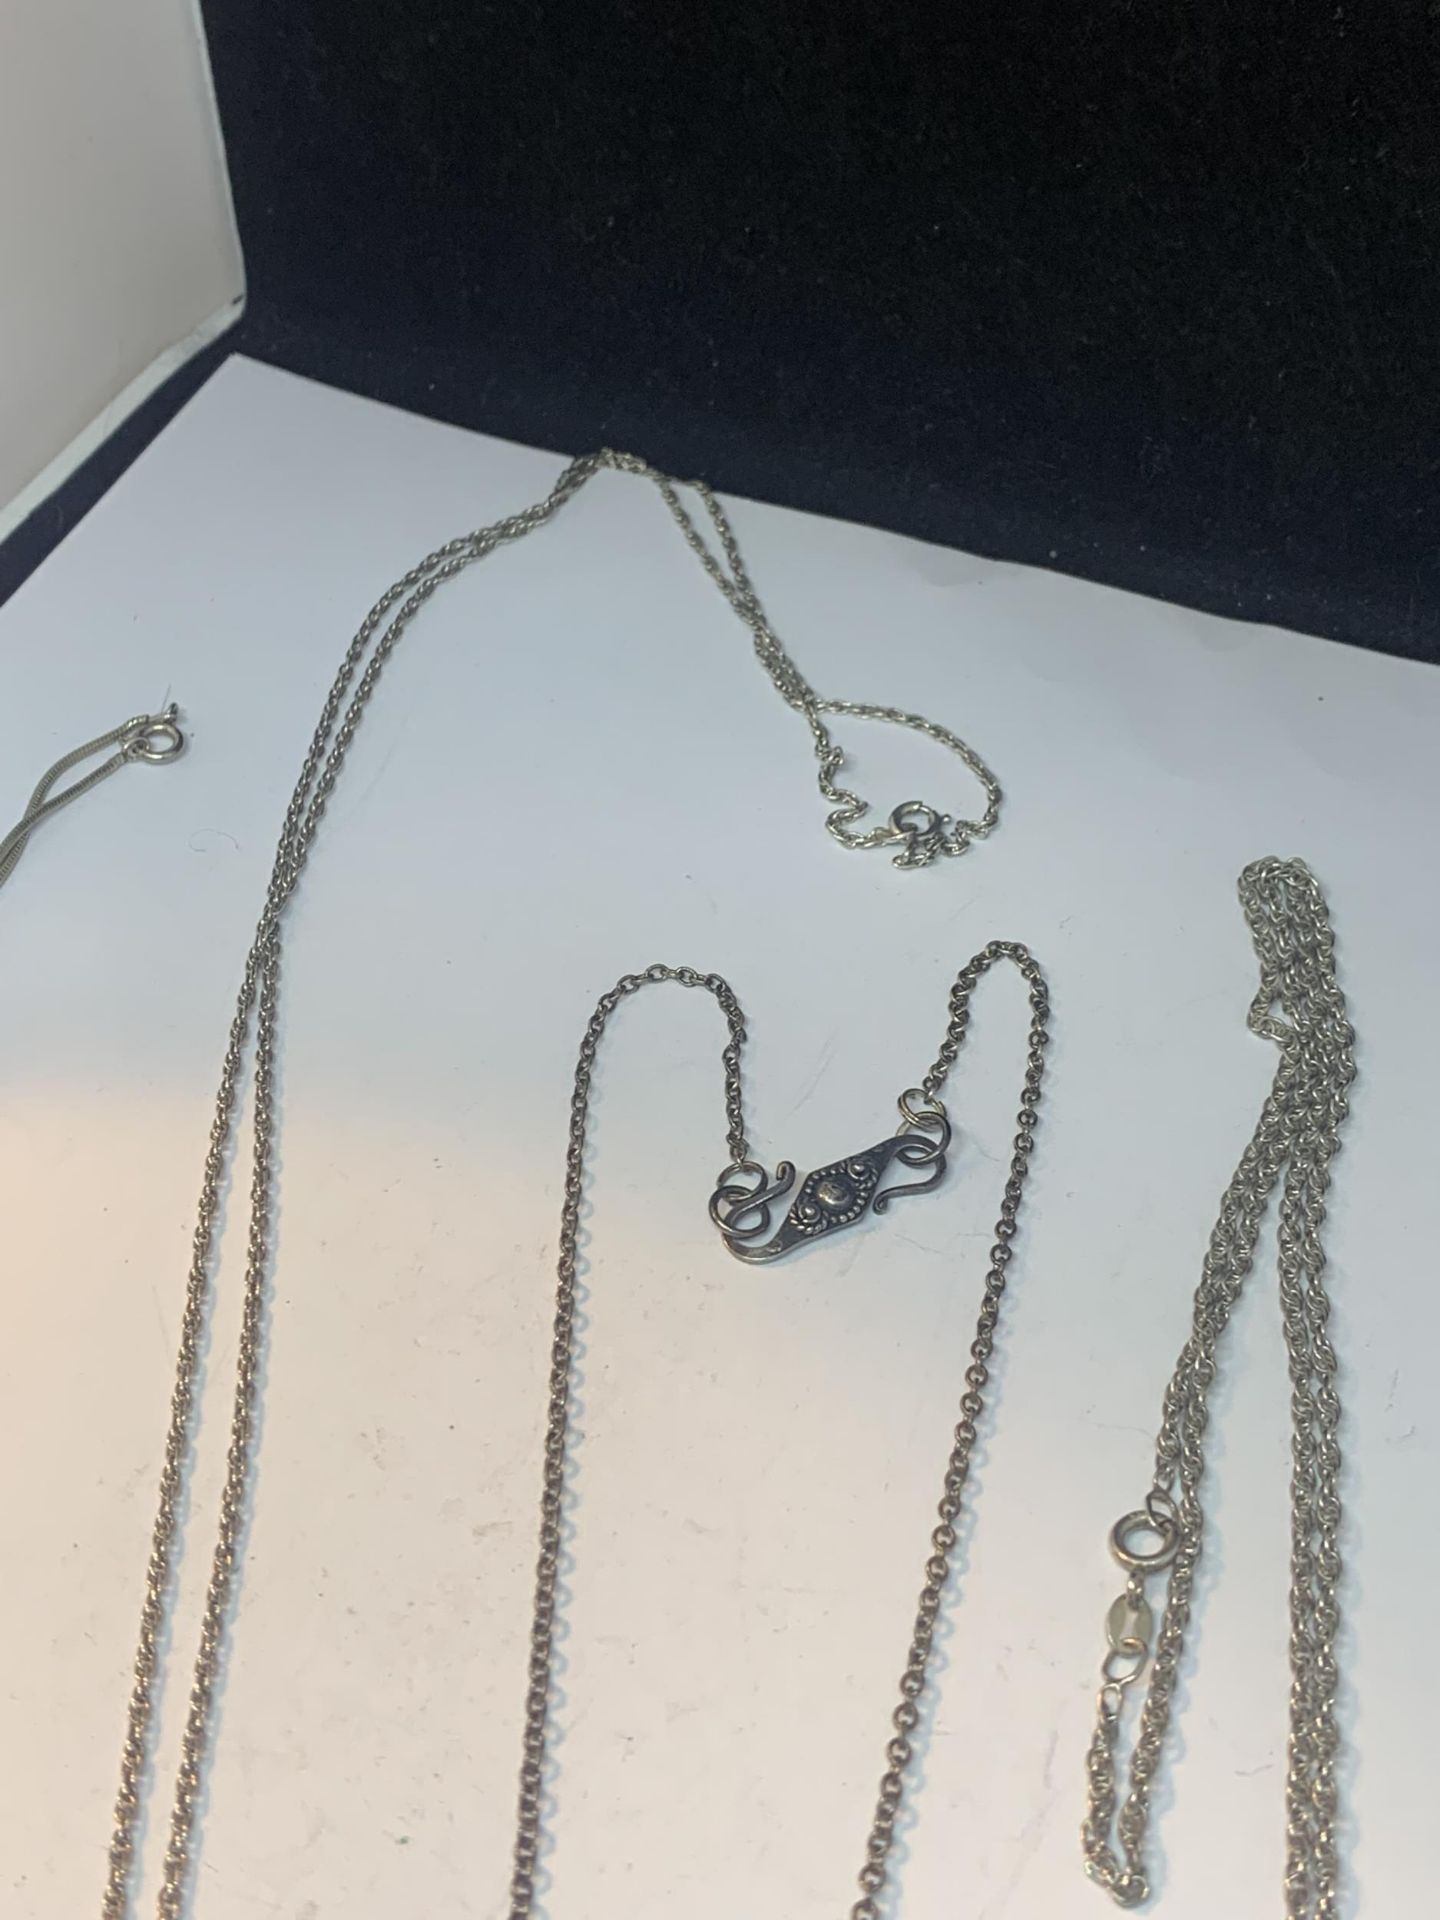 FOUR MARKED SILVER NECKLACES WITH PENDANTS - Image 4 of 4